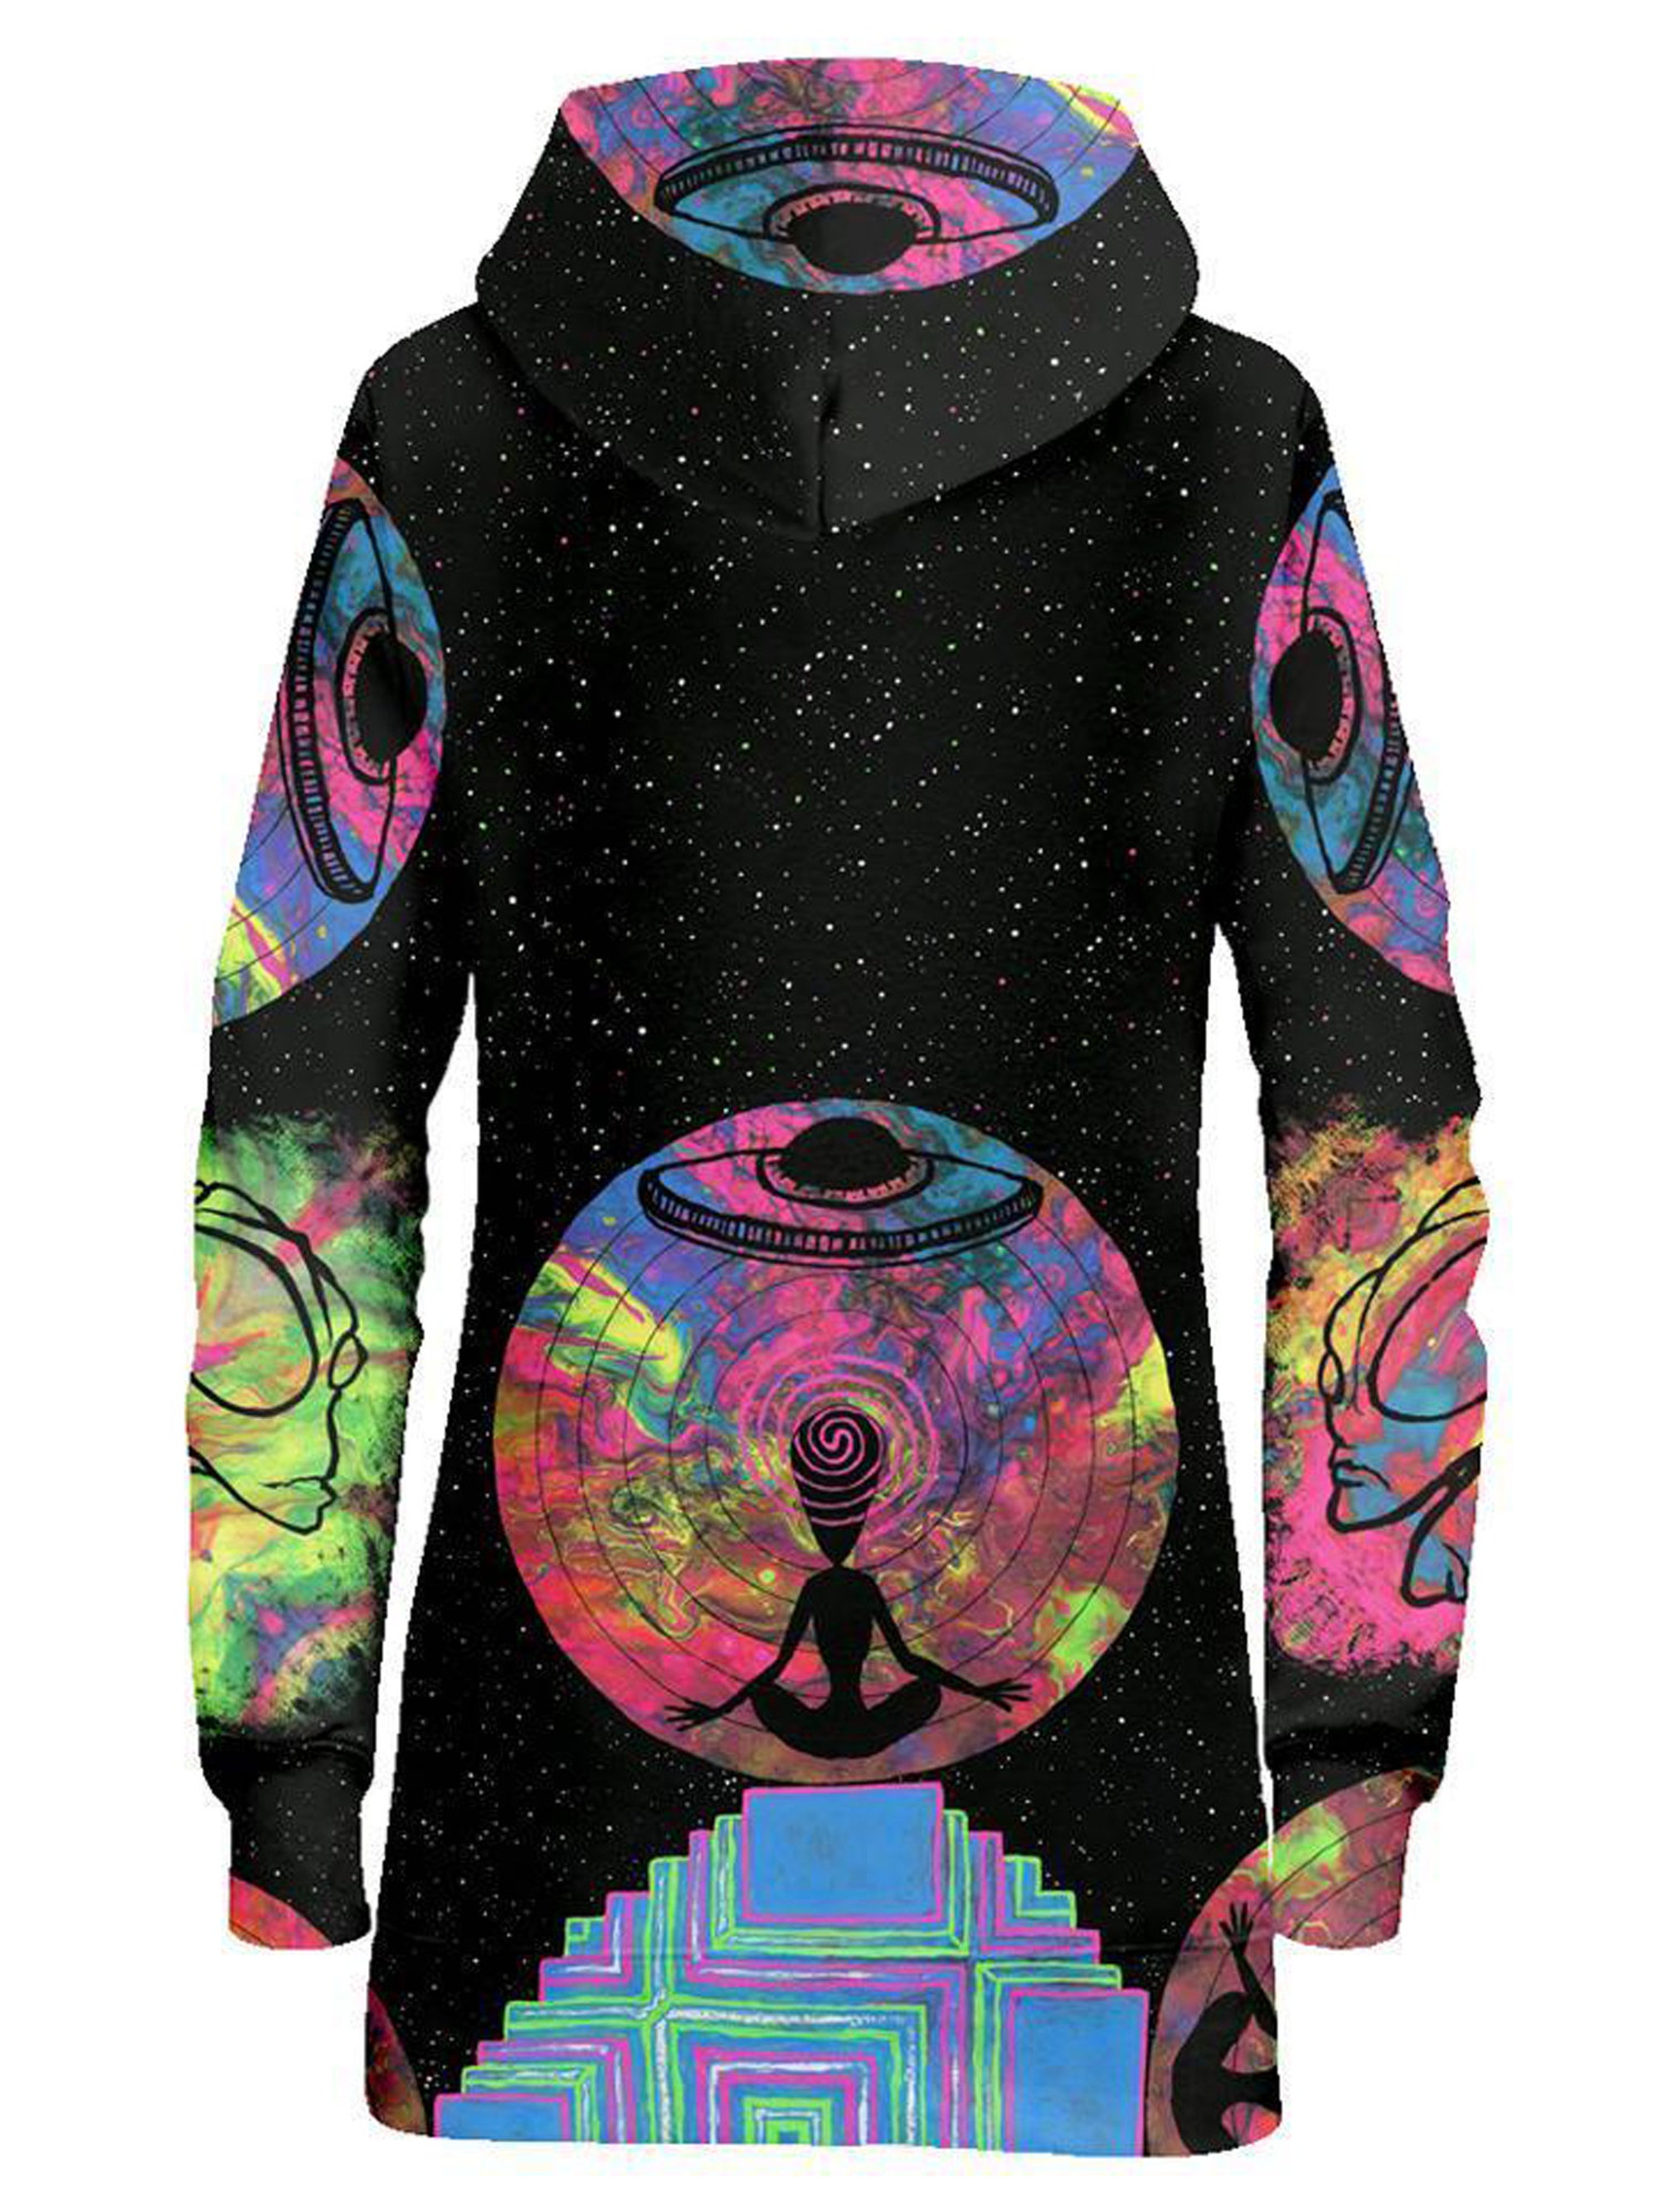 Alien Meditate Galactic 3D Graphic Print Long Sleeve Pullover Hooded